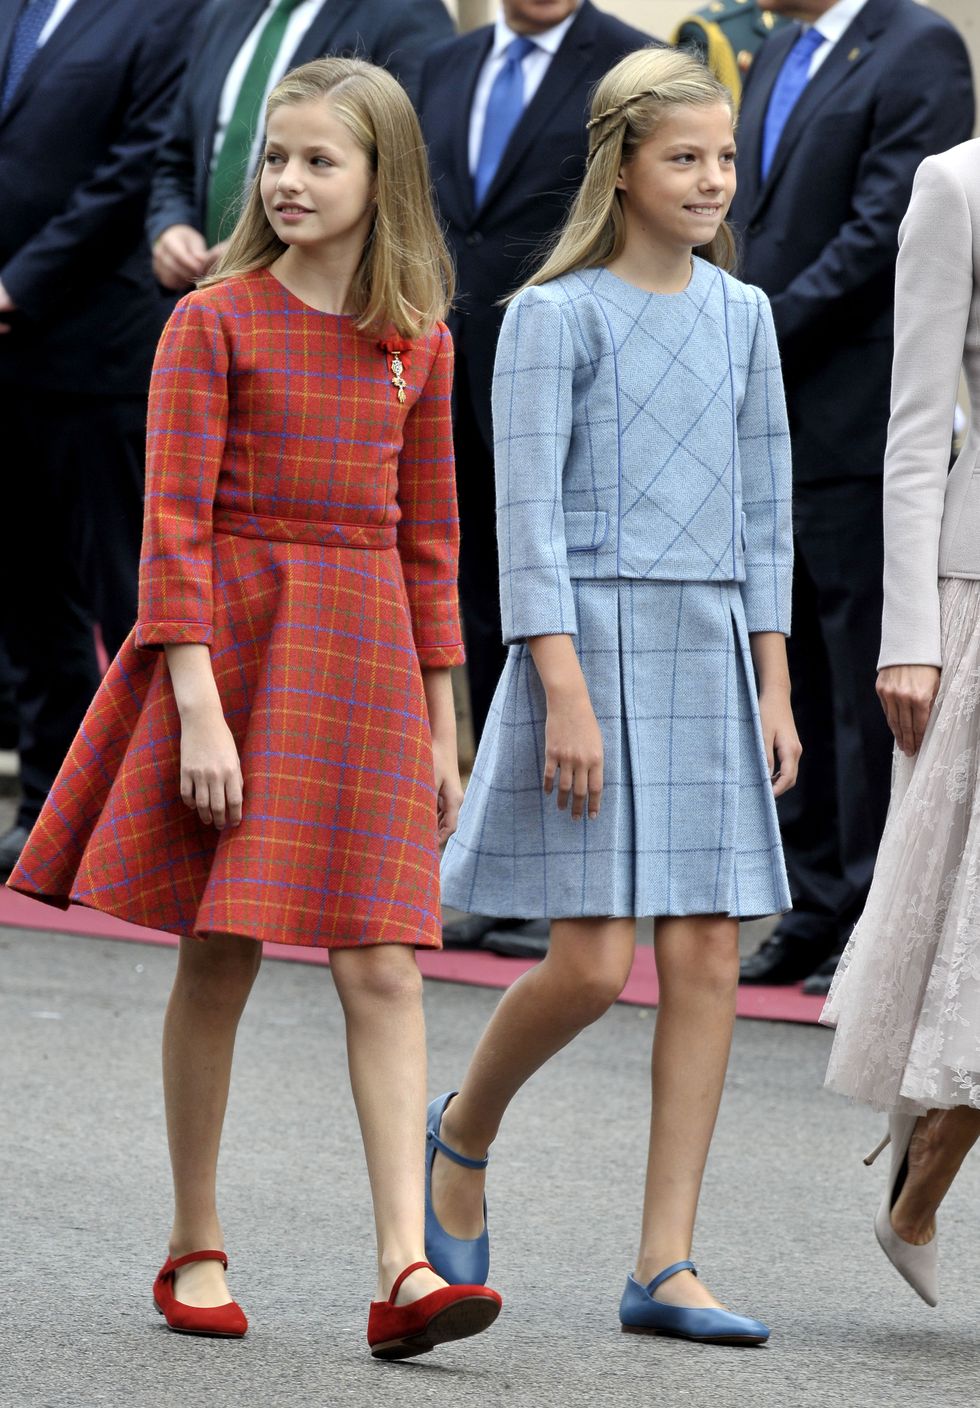 madrid, spain october 12 princess leonor l and princess sofia attend the national day military parade on october 12, 2018 in madrid, spain photo by europa presseuropa press via getty images